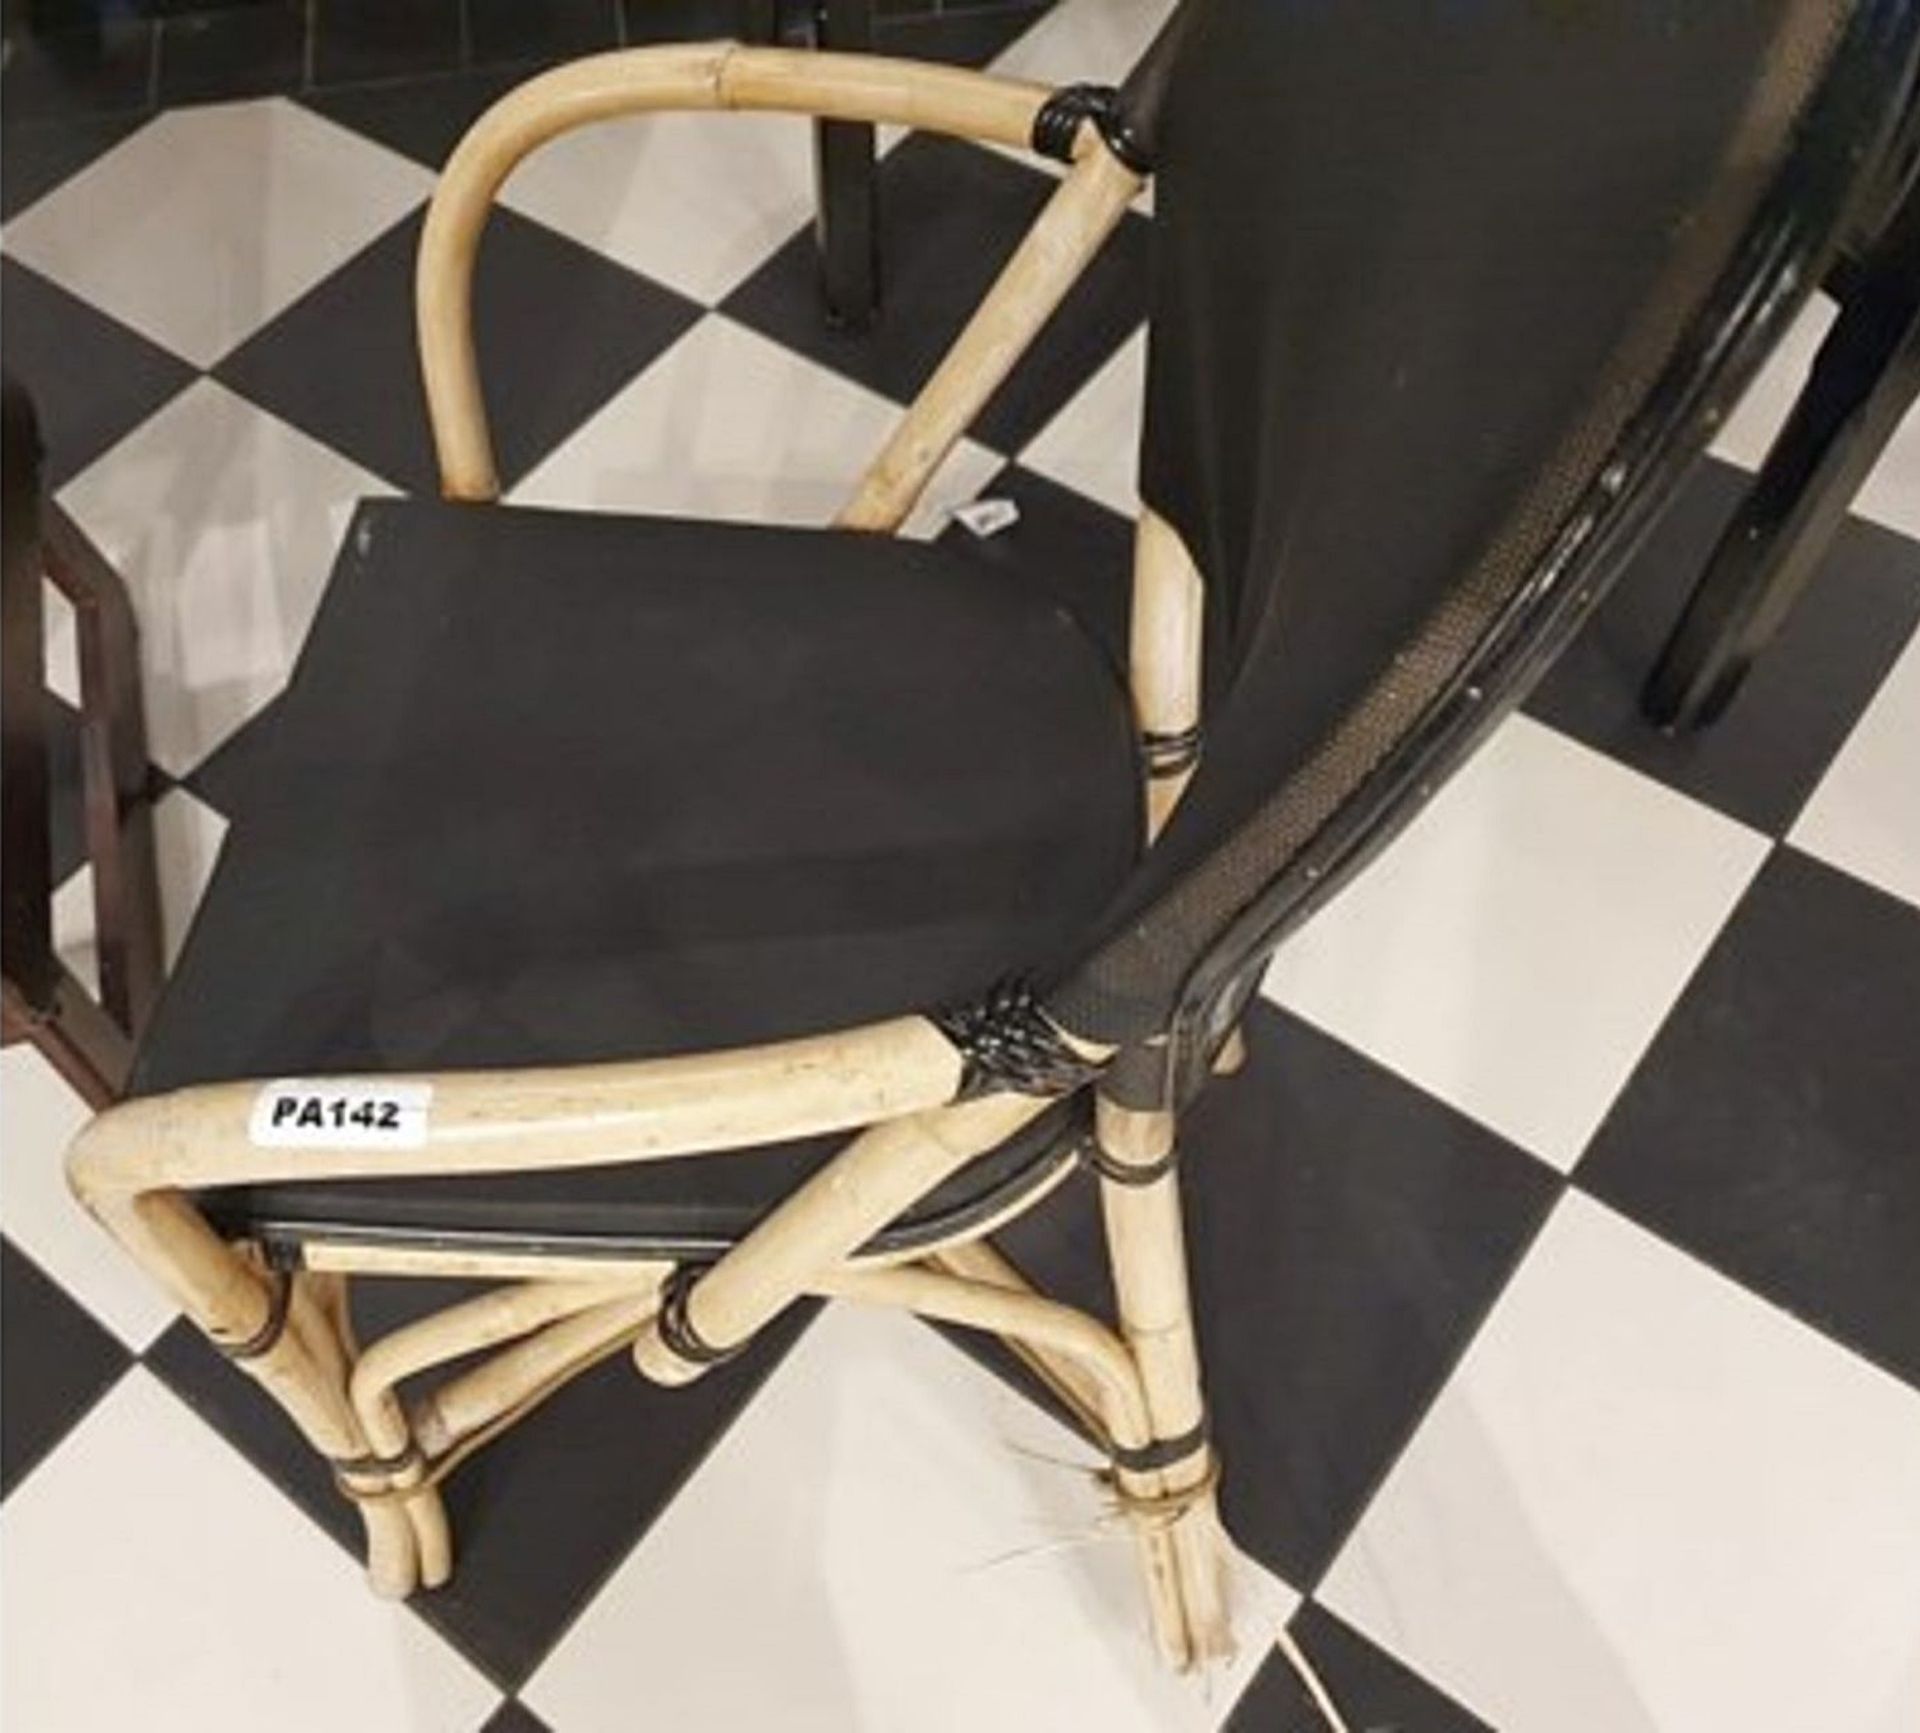 1 x Bamboo Studio Chair With Black Seat and Back Rest - Features the Name 'PAUL' Printed on the Back - Image 3 of 3